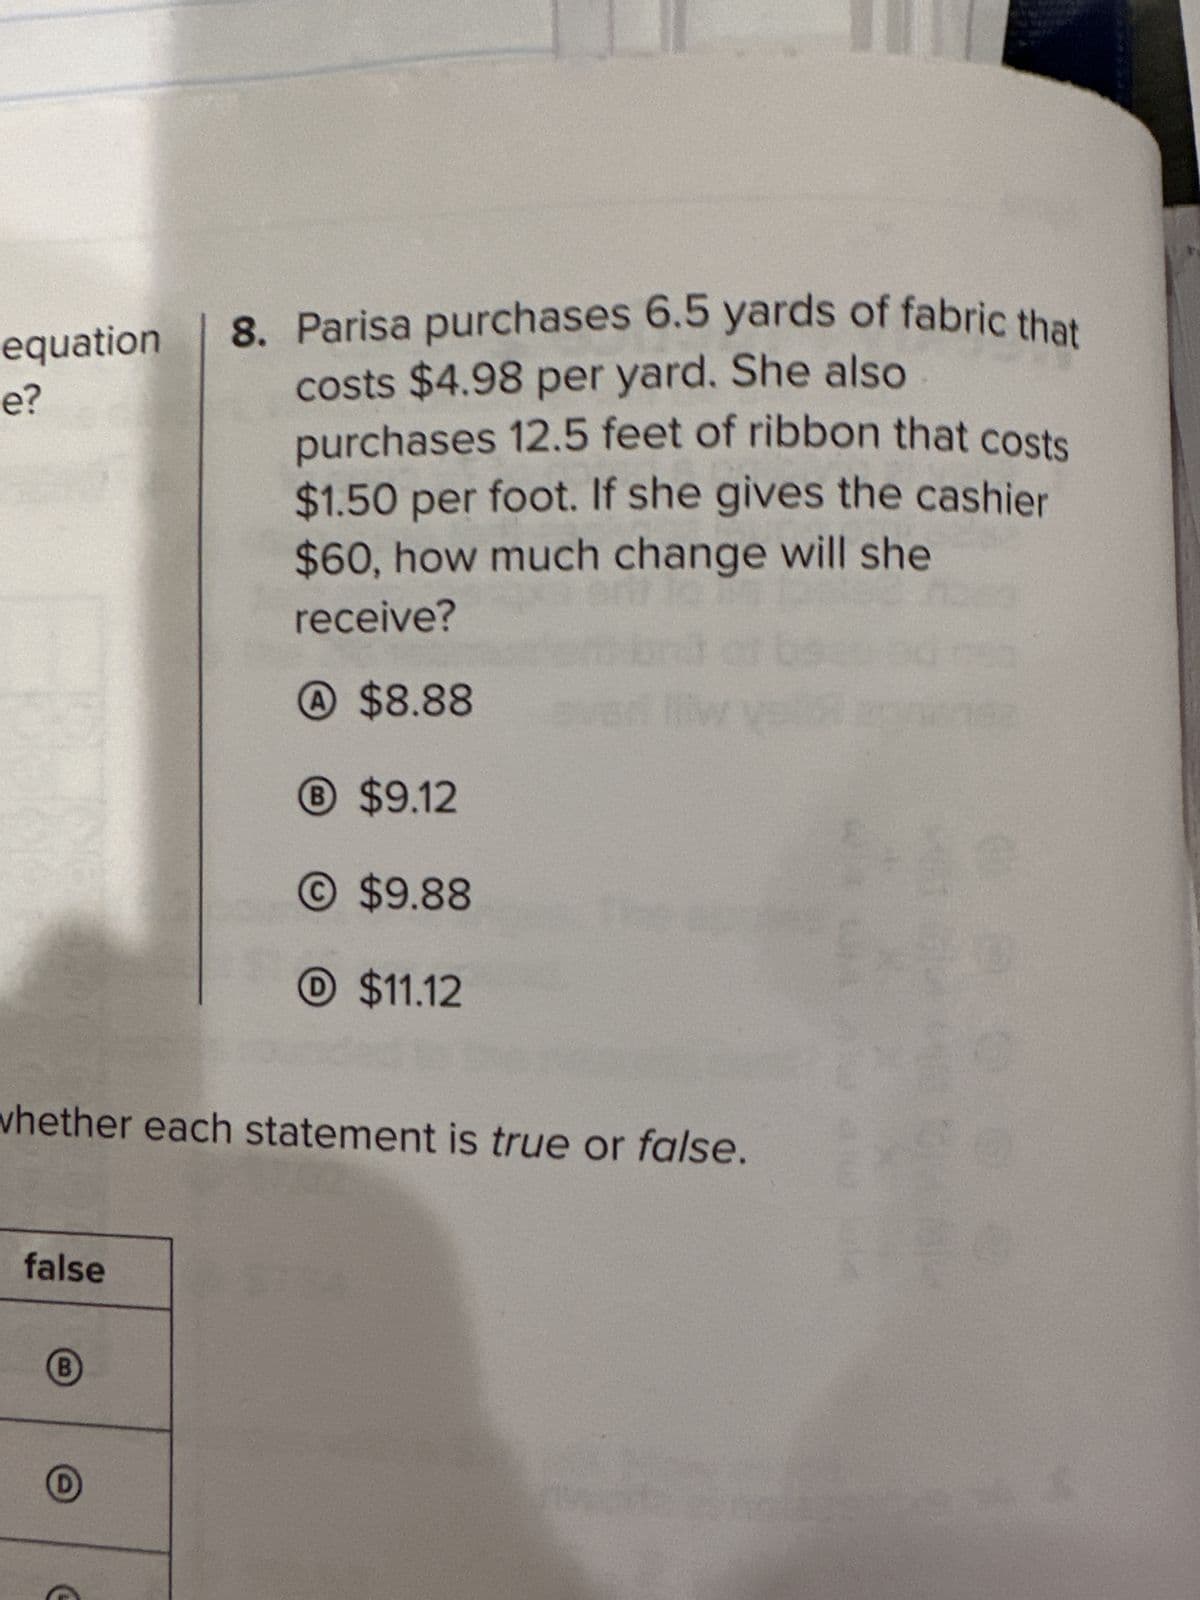 equation
e?
false
whether each statement is true or false.
B
8. Parisa purchases 6.5 yards of fabric that
costs $4.98 per yard. She also
purchases 12.5 feet of ribbon that costs
$1.50 per foot. If she gives the cashier
$60, how much change will she
receive?
A $8.88
® $9.12
©$9.88
C
$11.12